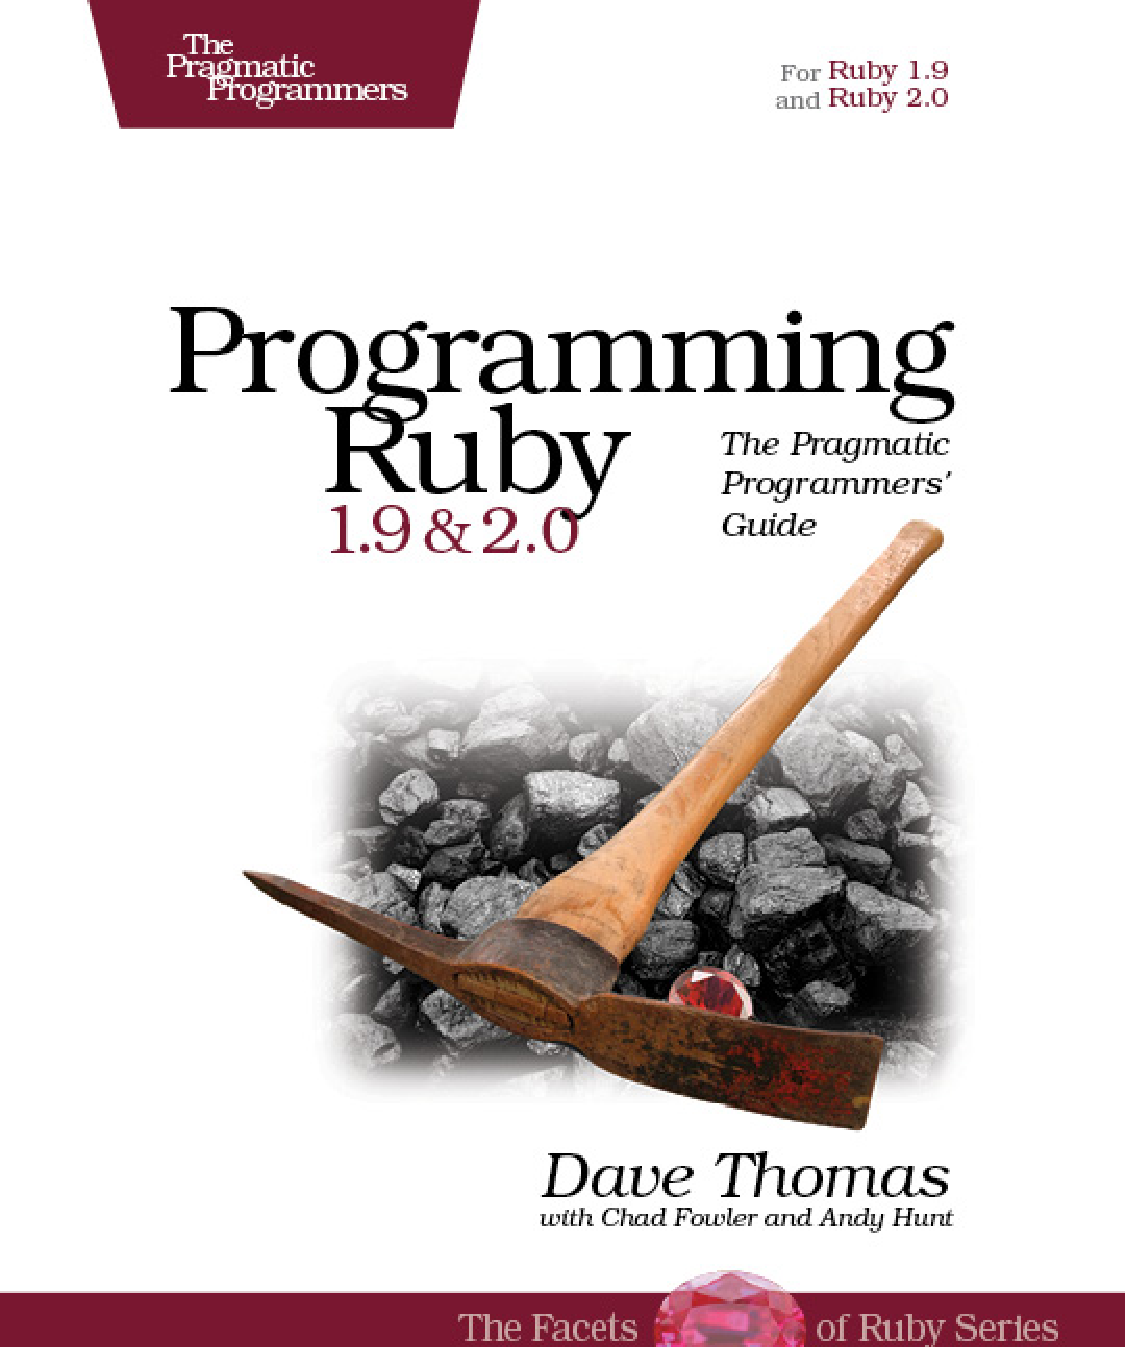 Best ide for ruby on rails mac